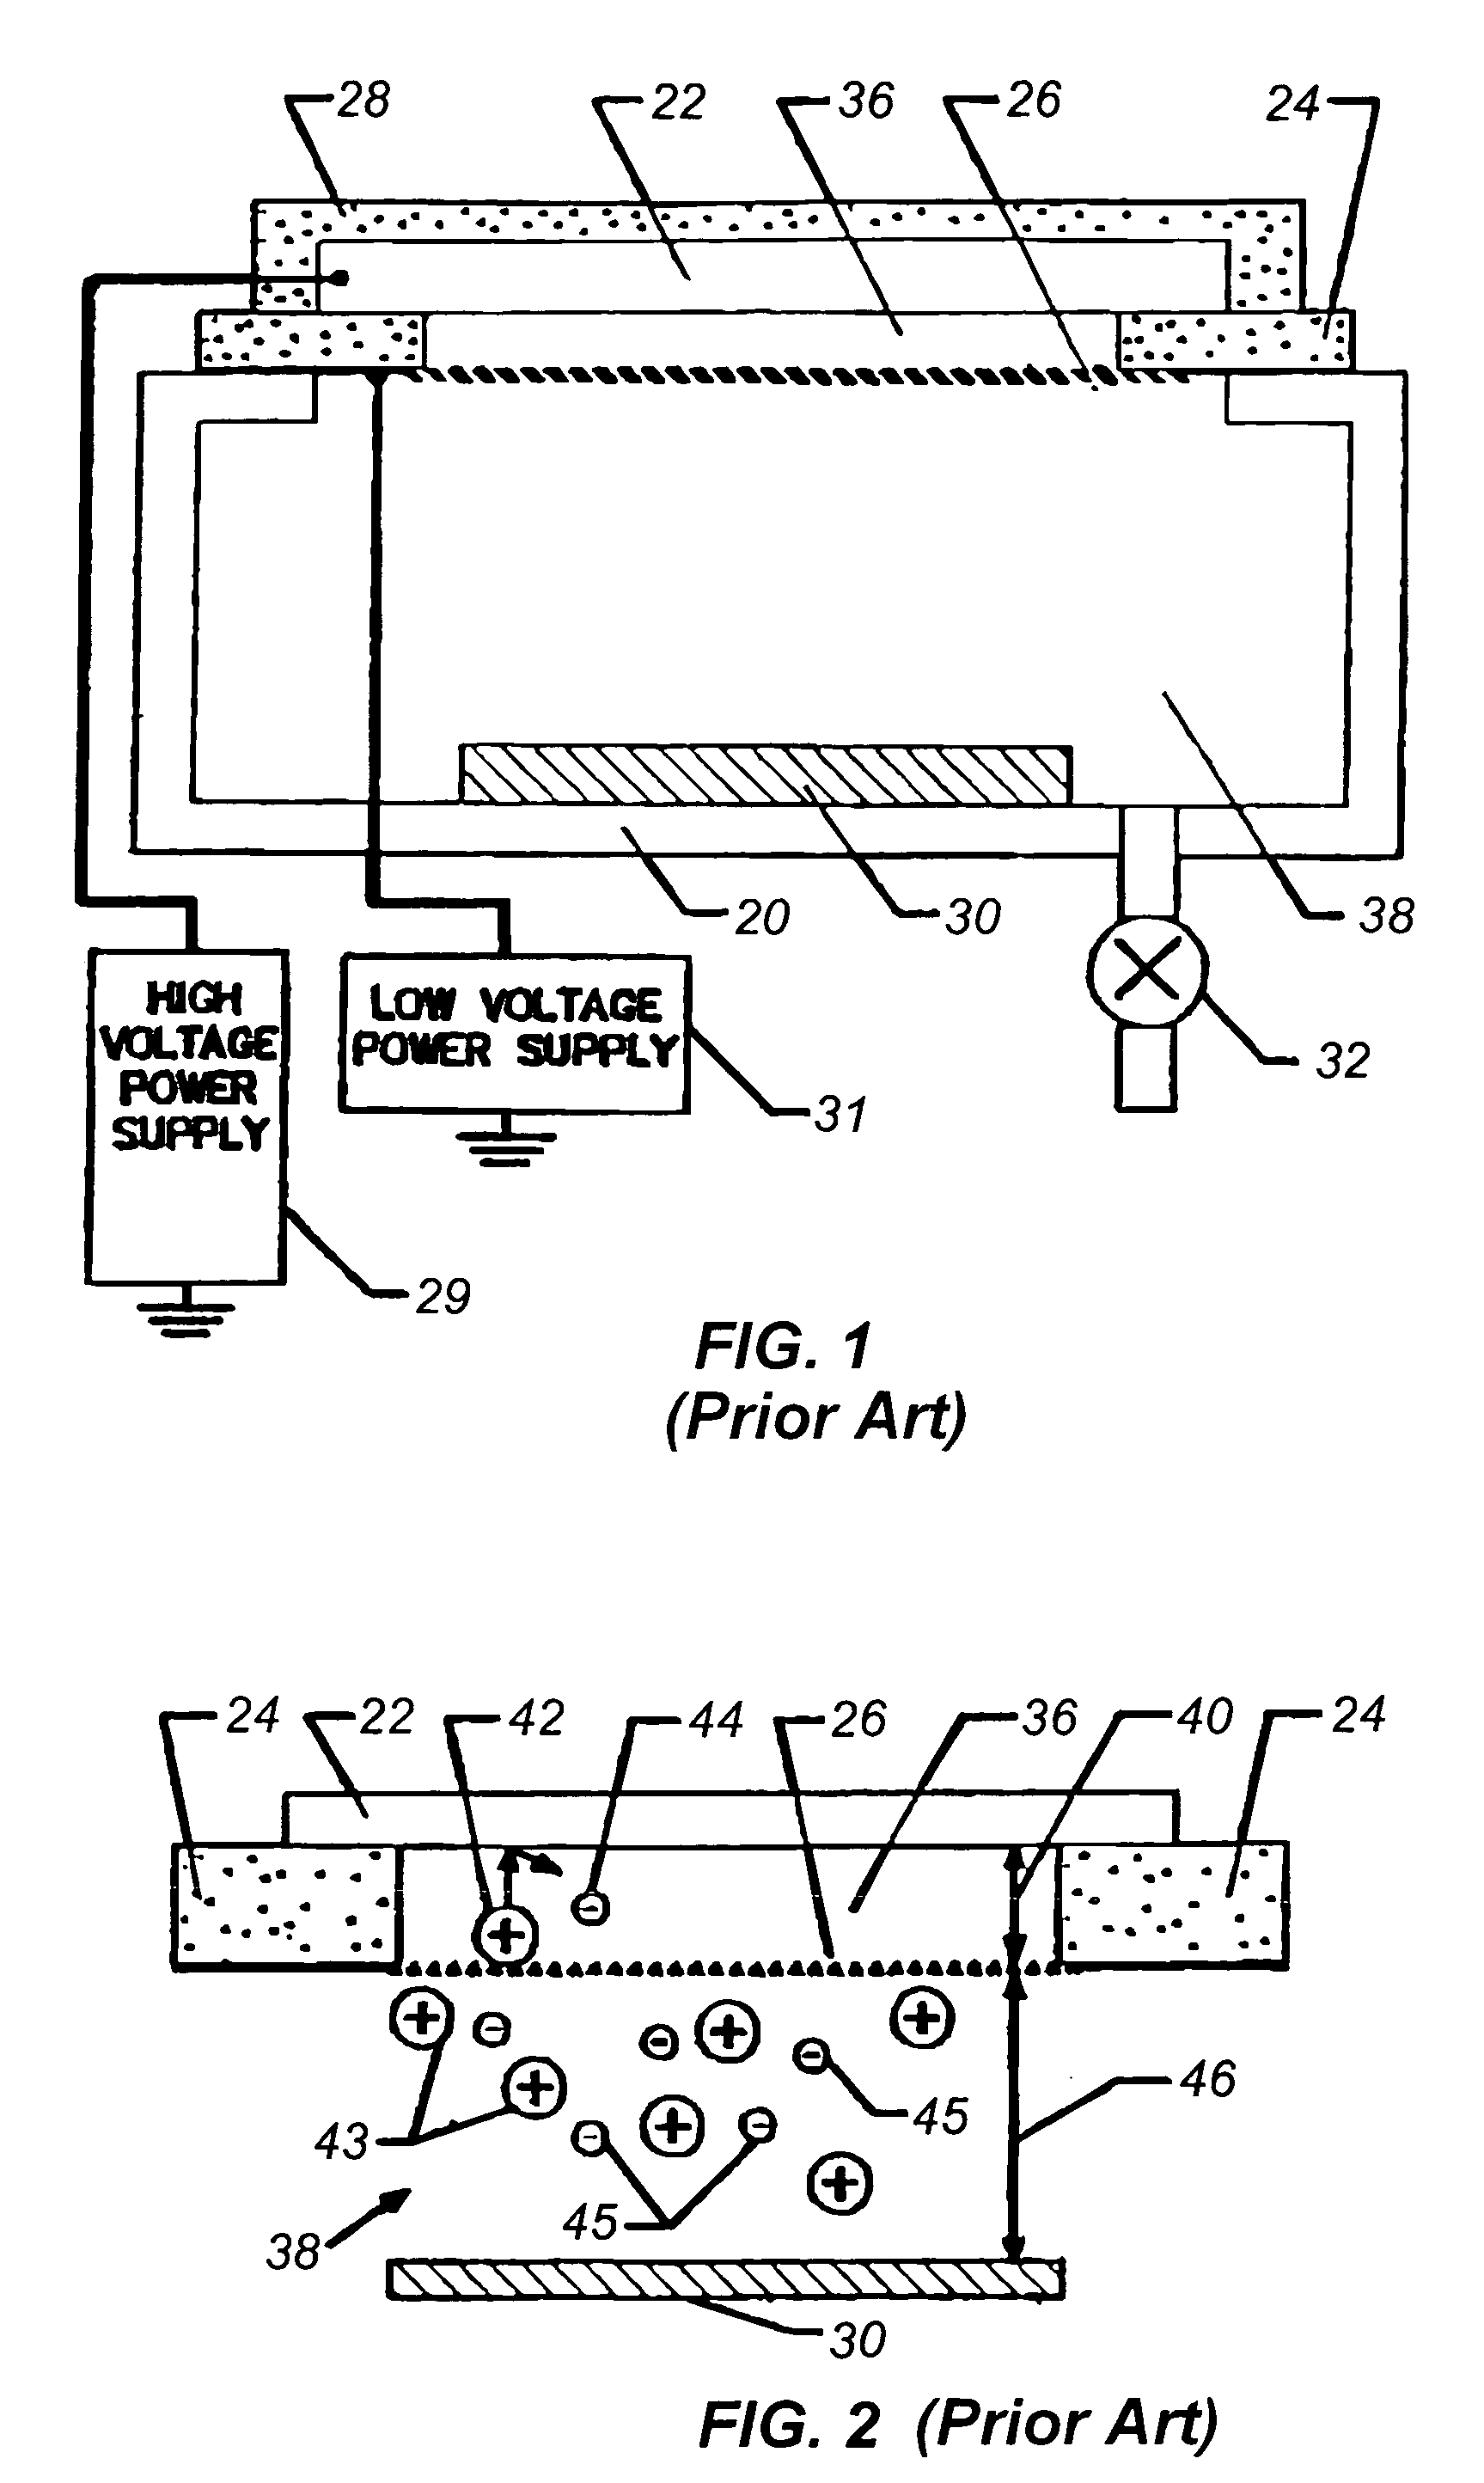 Method and apparatus for reducing charge density on a dielectric coated substrate after exposure to a large area electron beam